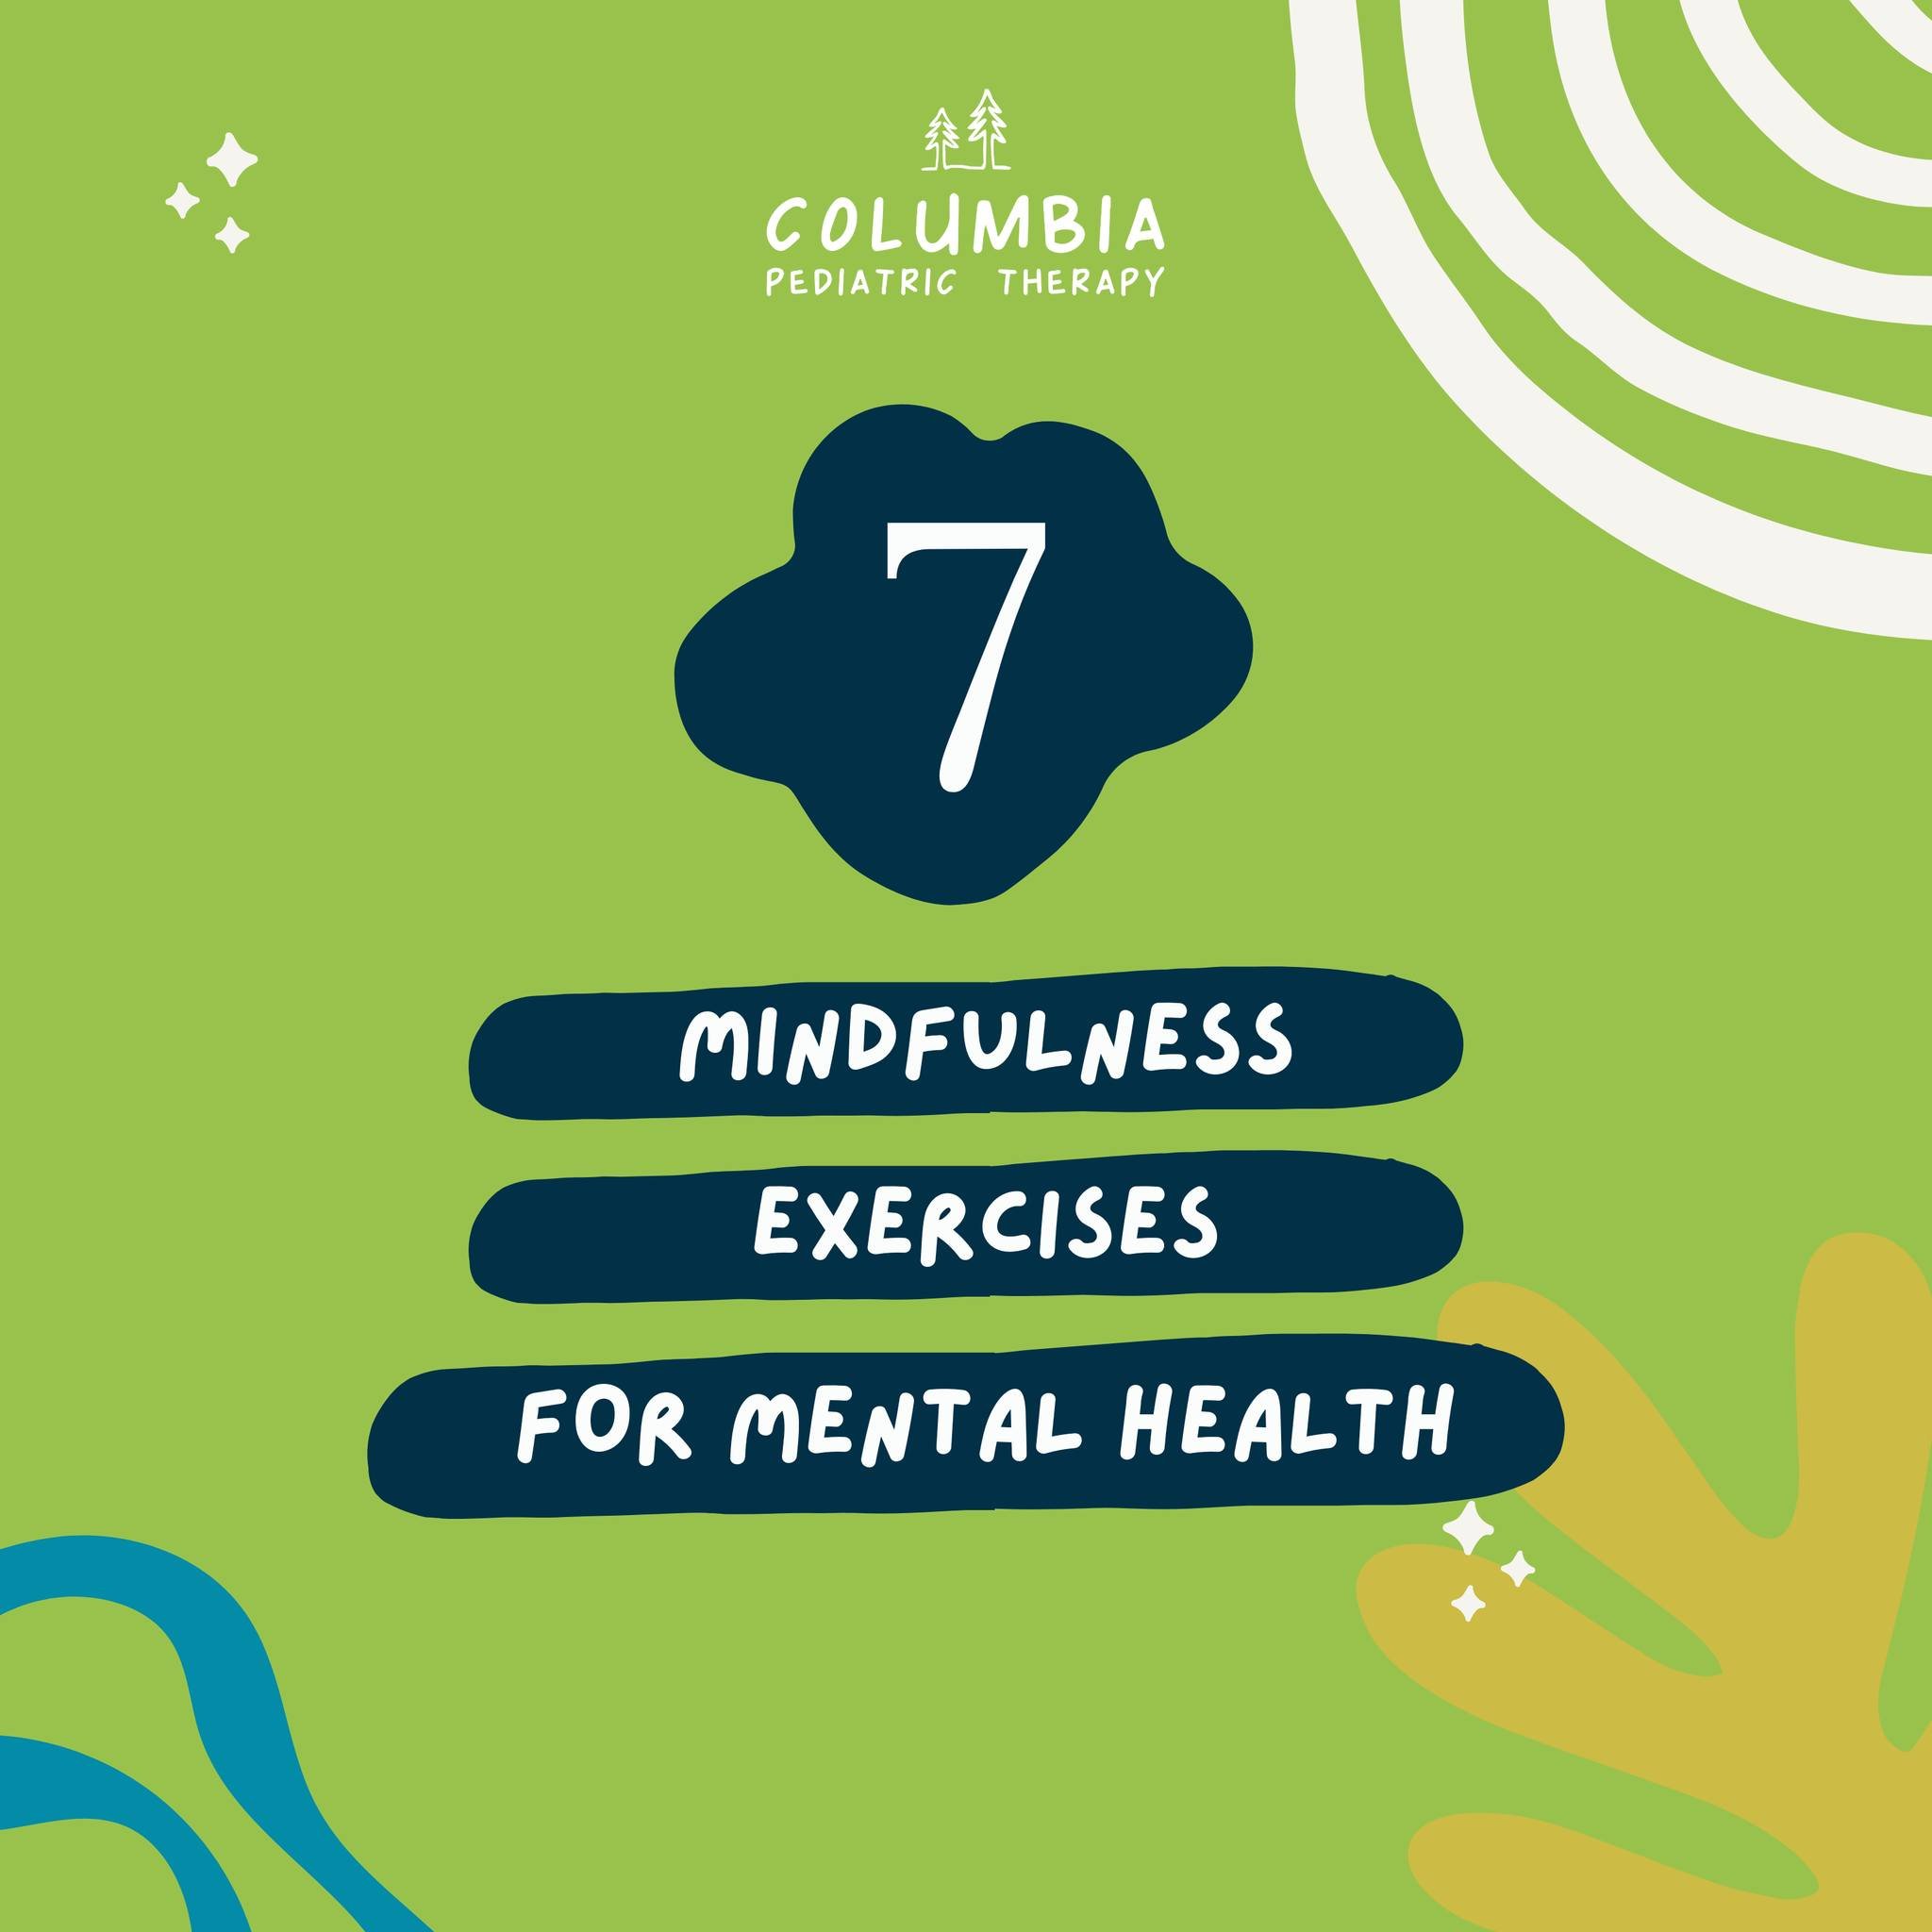 May 1st marks Mental Health Awareness Day, and at Columbia Pediatric Therapy, we're not just focused on children's well-being, but on parents too! 💙 Let's prioritize our mental health together, because when parents are well, families thrive. 🌟
.
.
